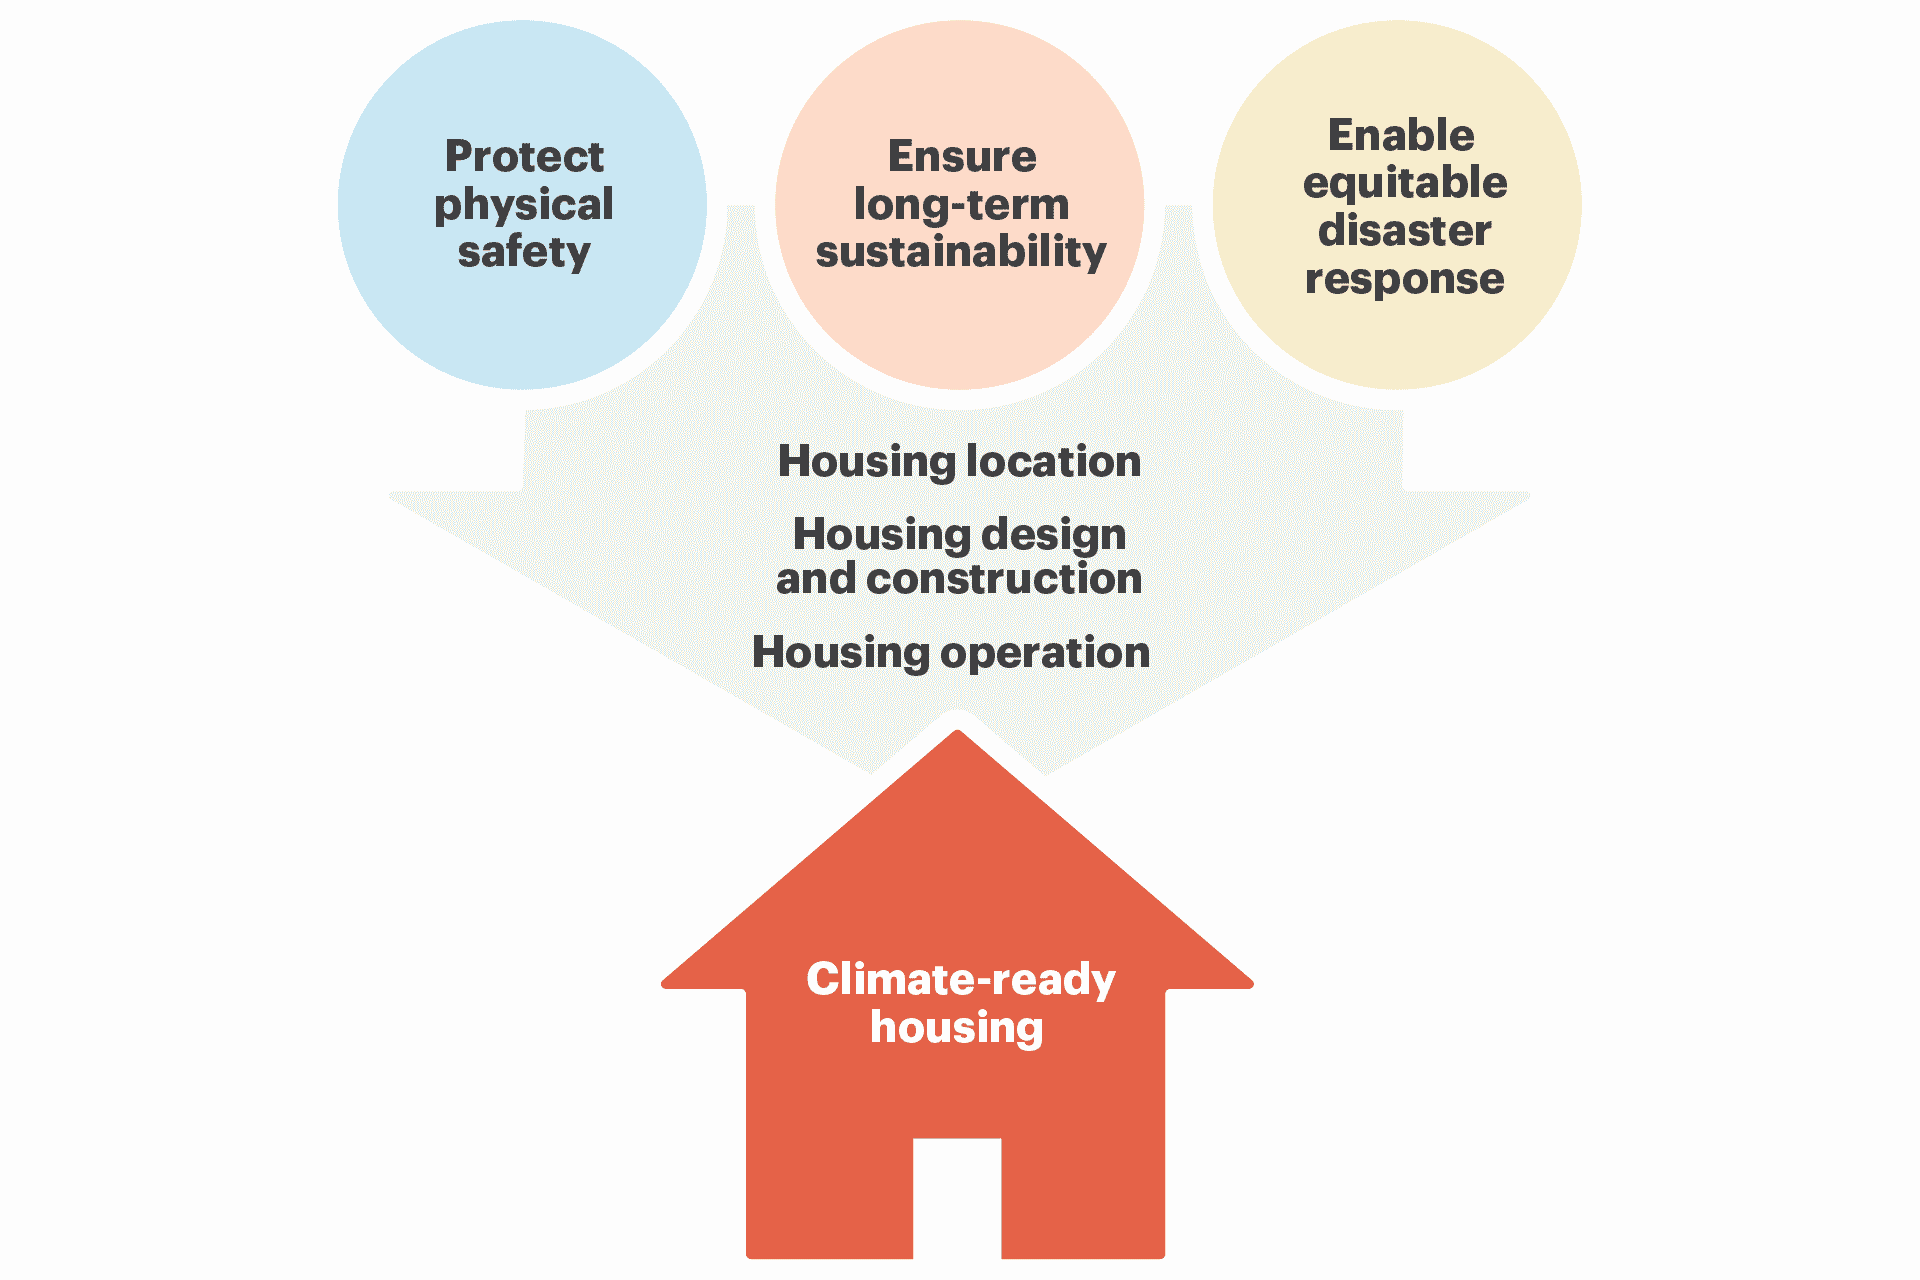 A graphic illustrating the pathways to climate-ready housing